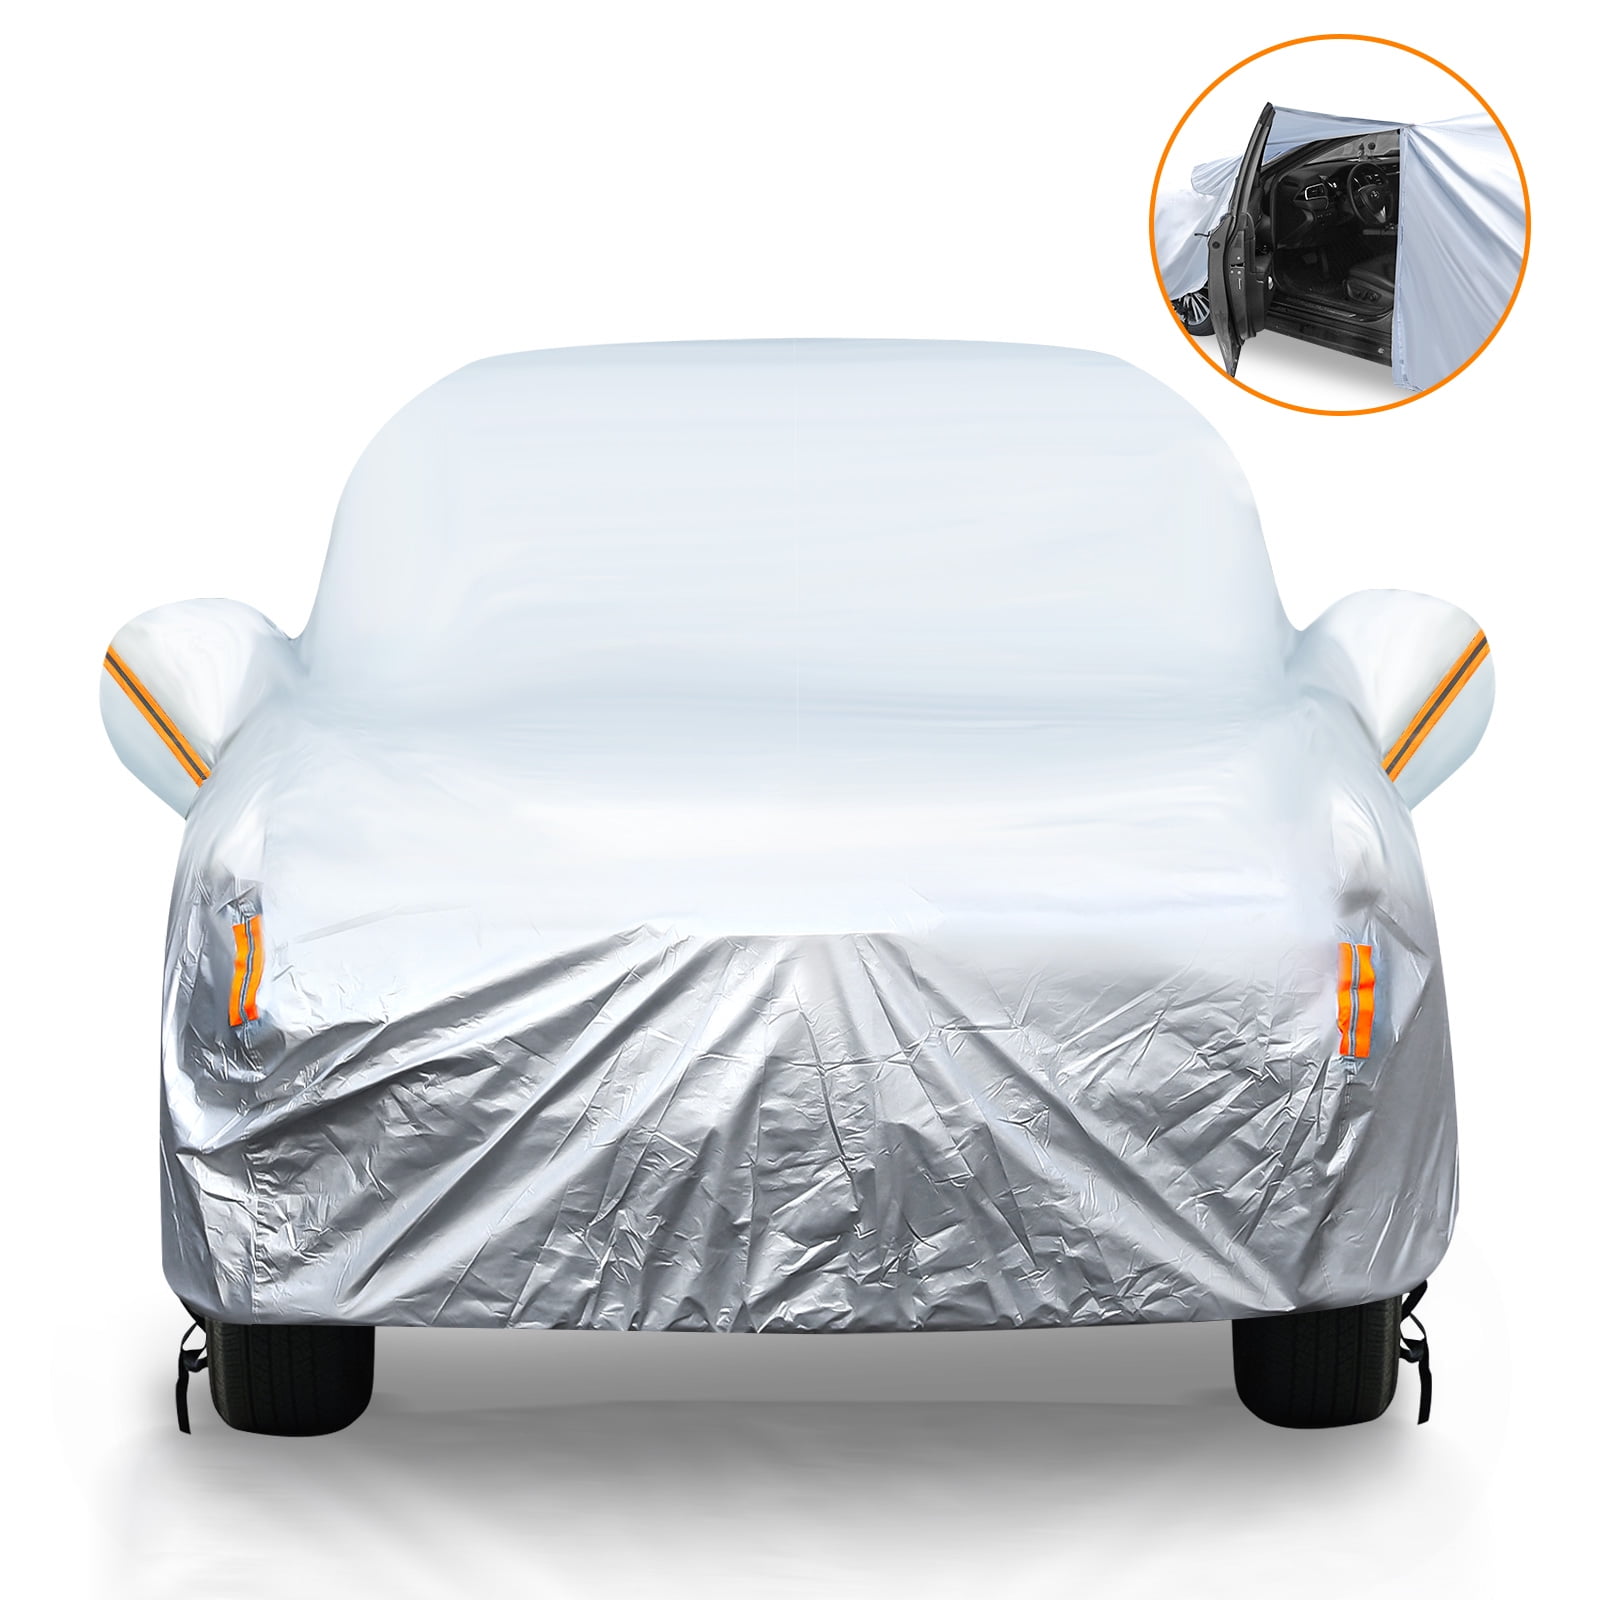 Coverado Basic Car Cover with Build-in Storage Bag Door Zipper Windproof Straps and Buckles 100% Waterproof All Season Weather-Proof Fit 170-190 Len